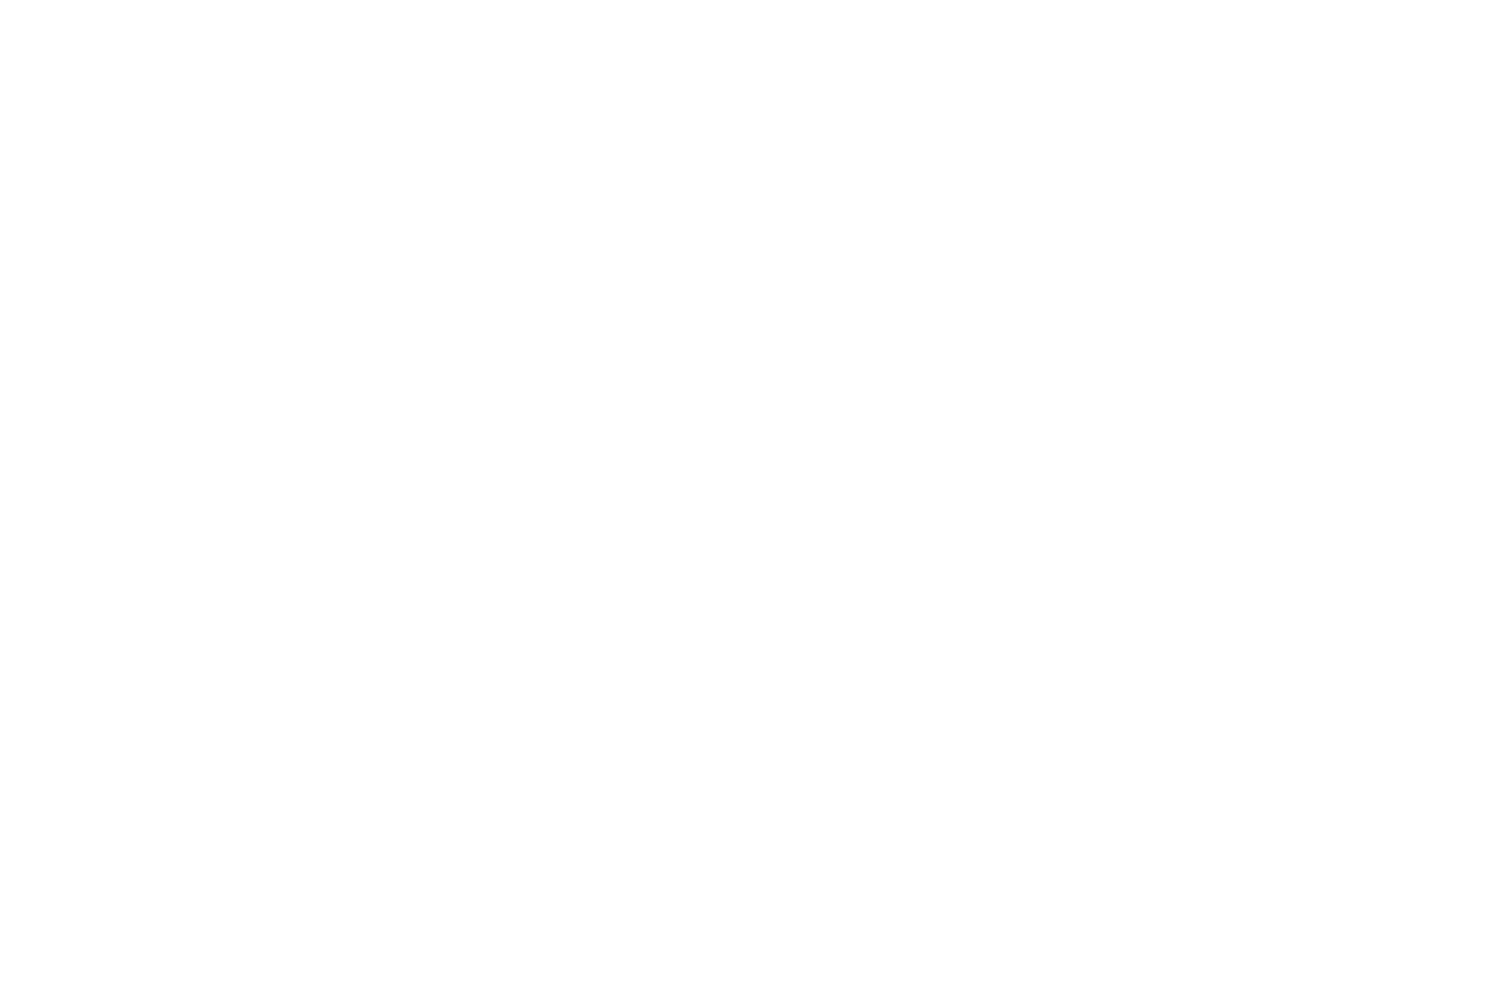 small group